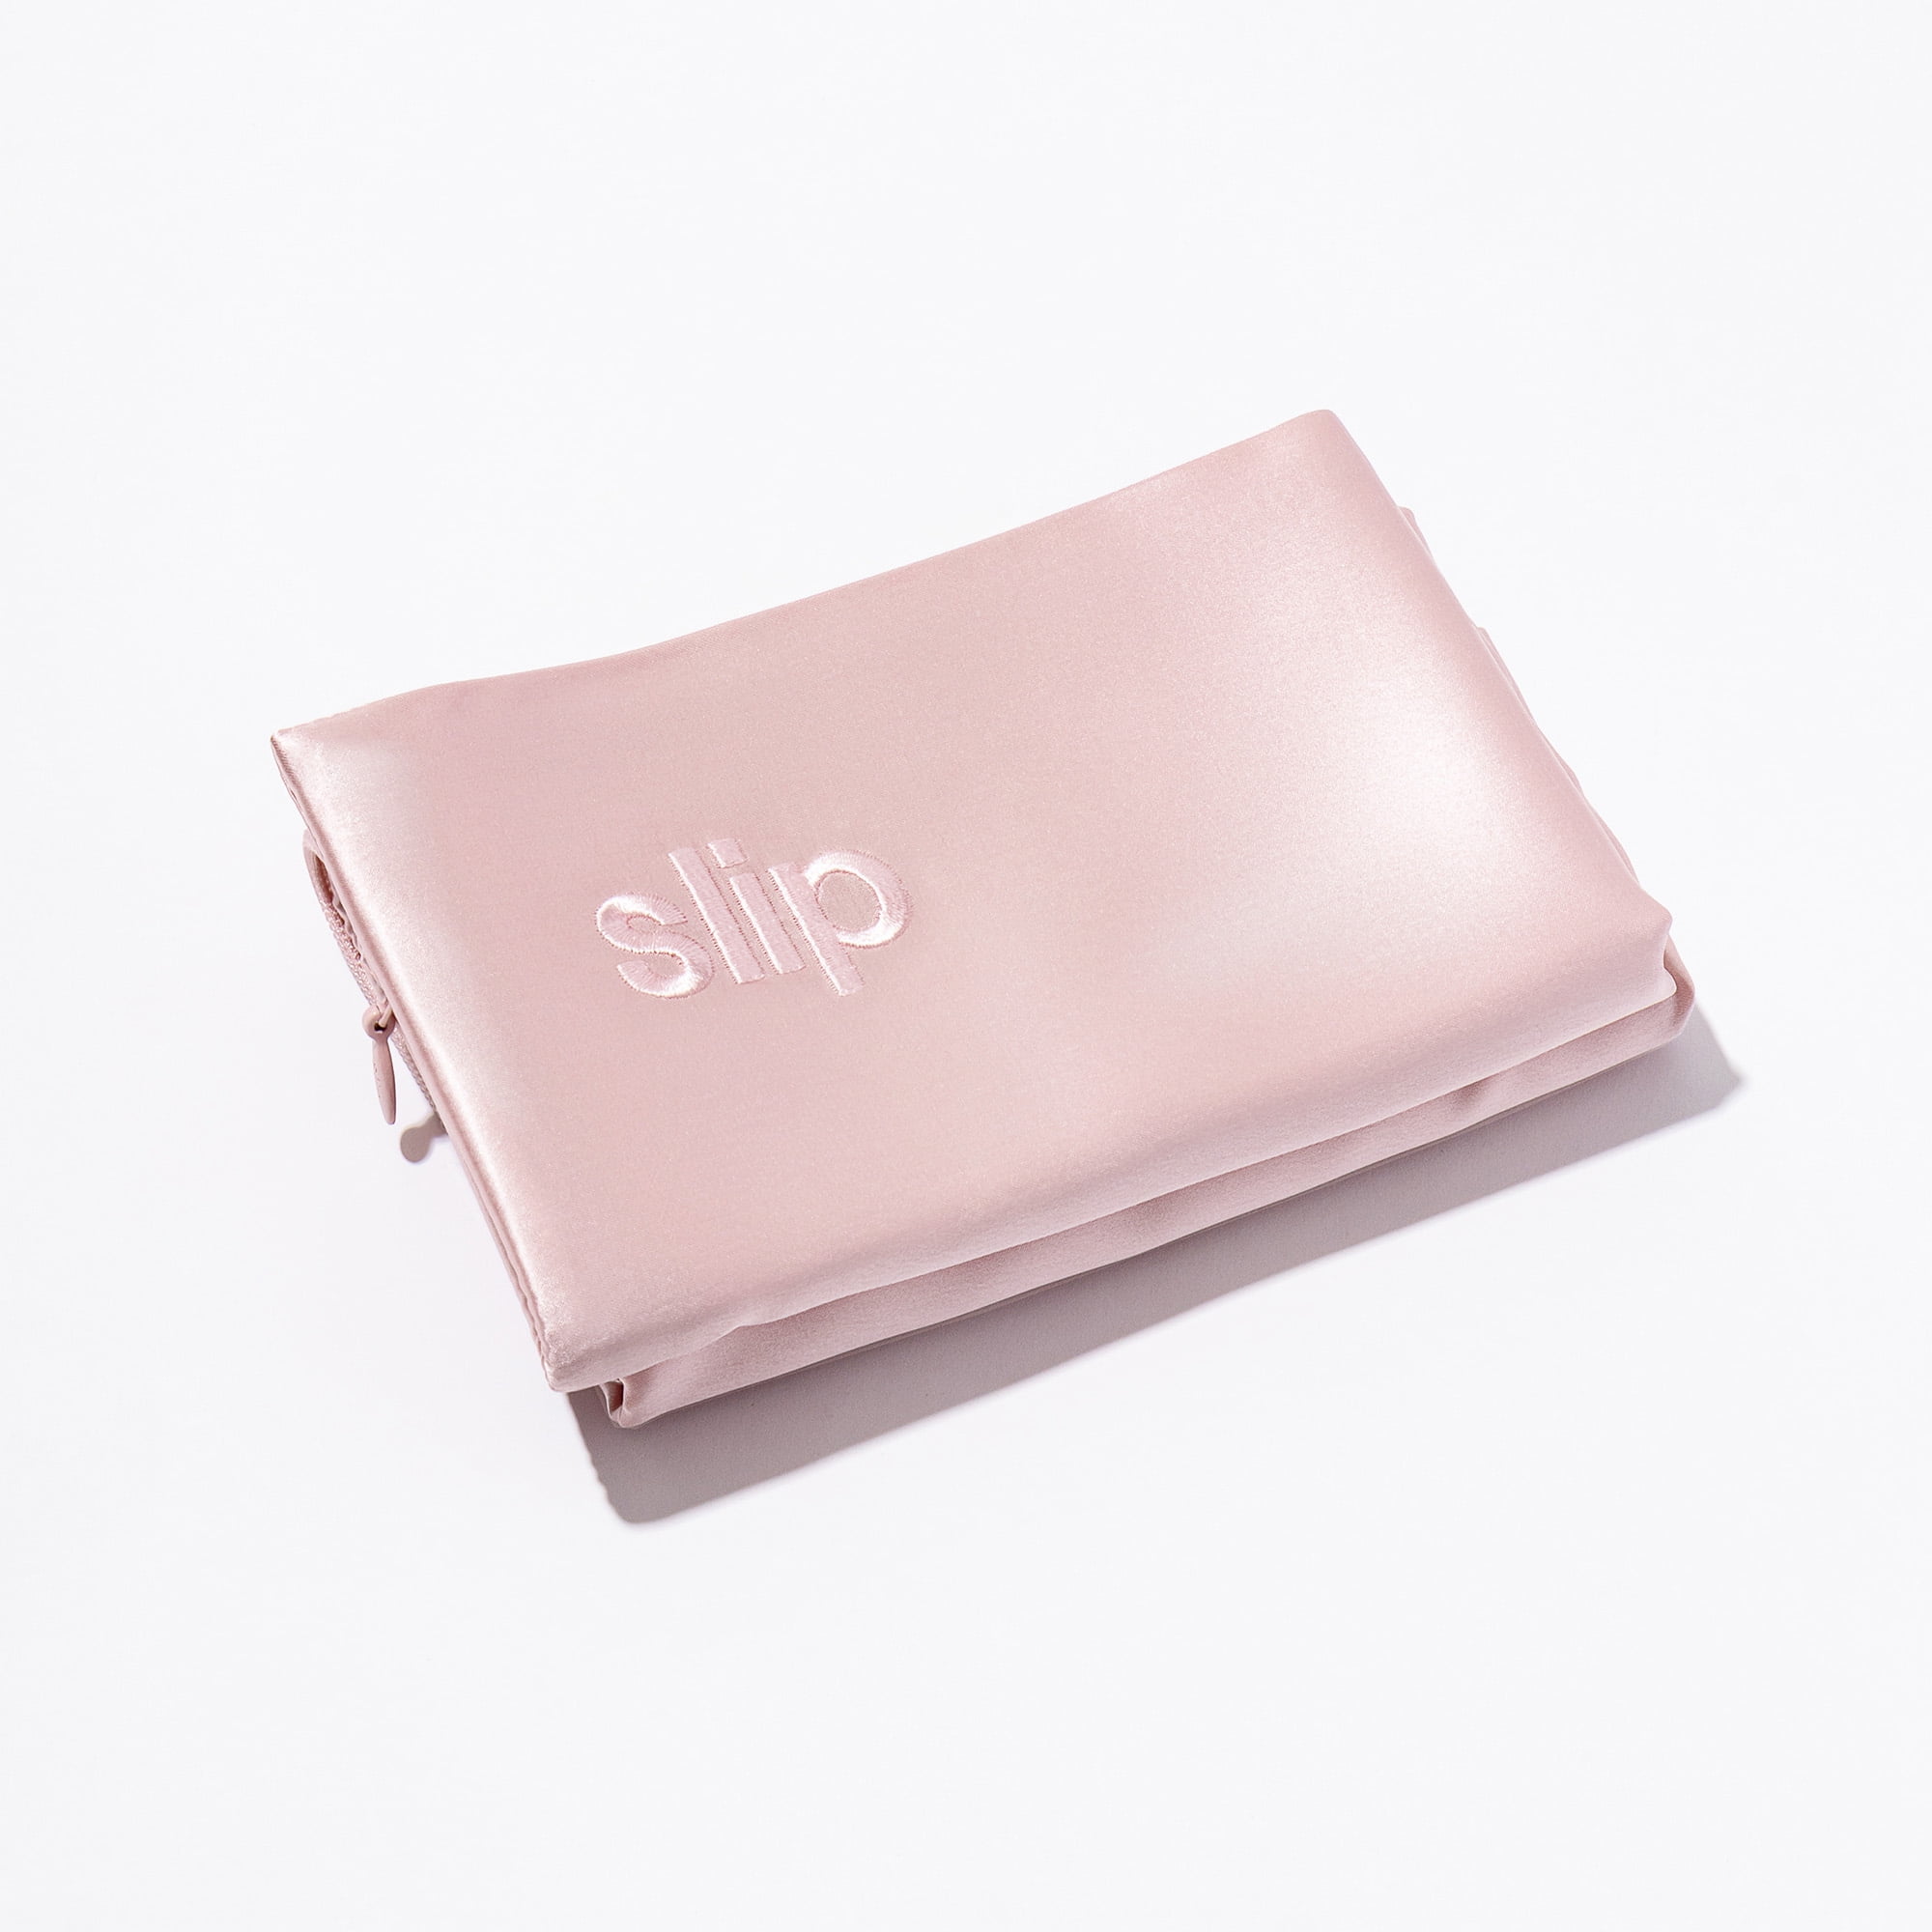 Pillowcases Pure Silk Pillowcase Pink by slip ❤️ Buy online